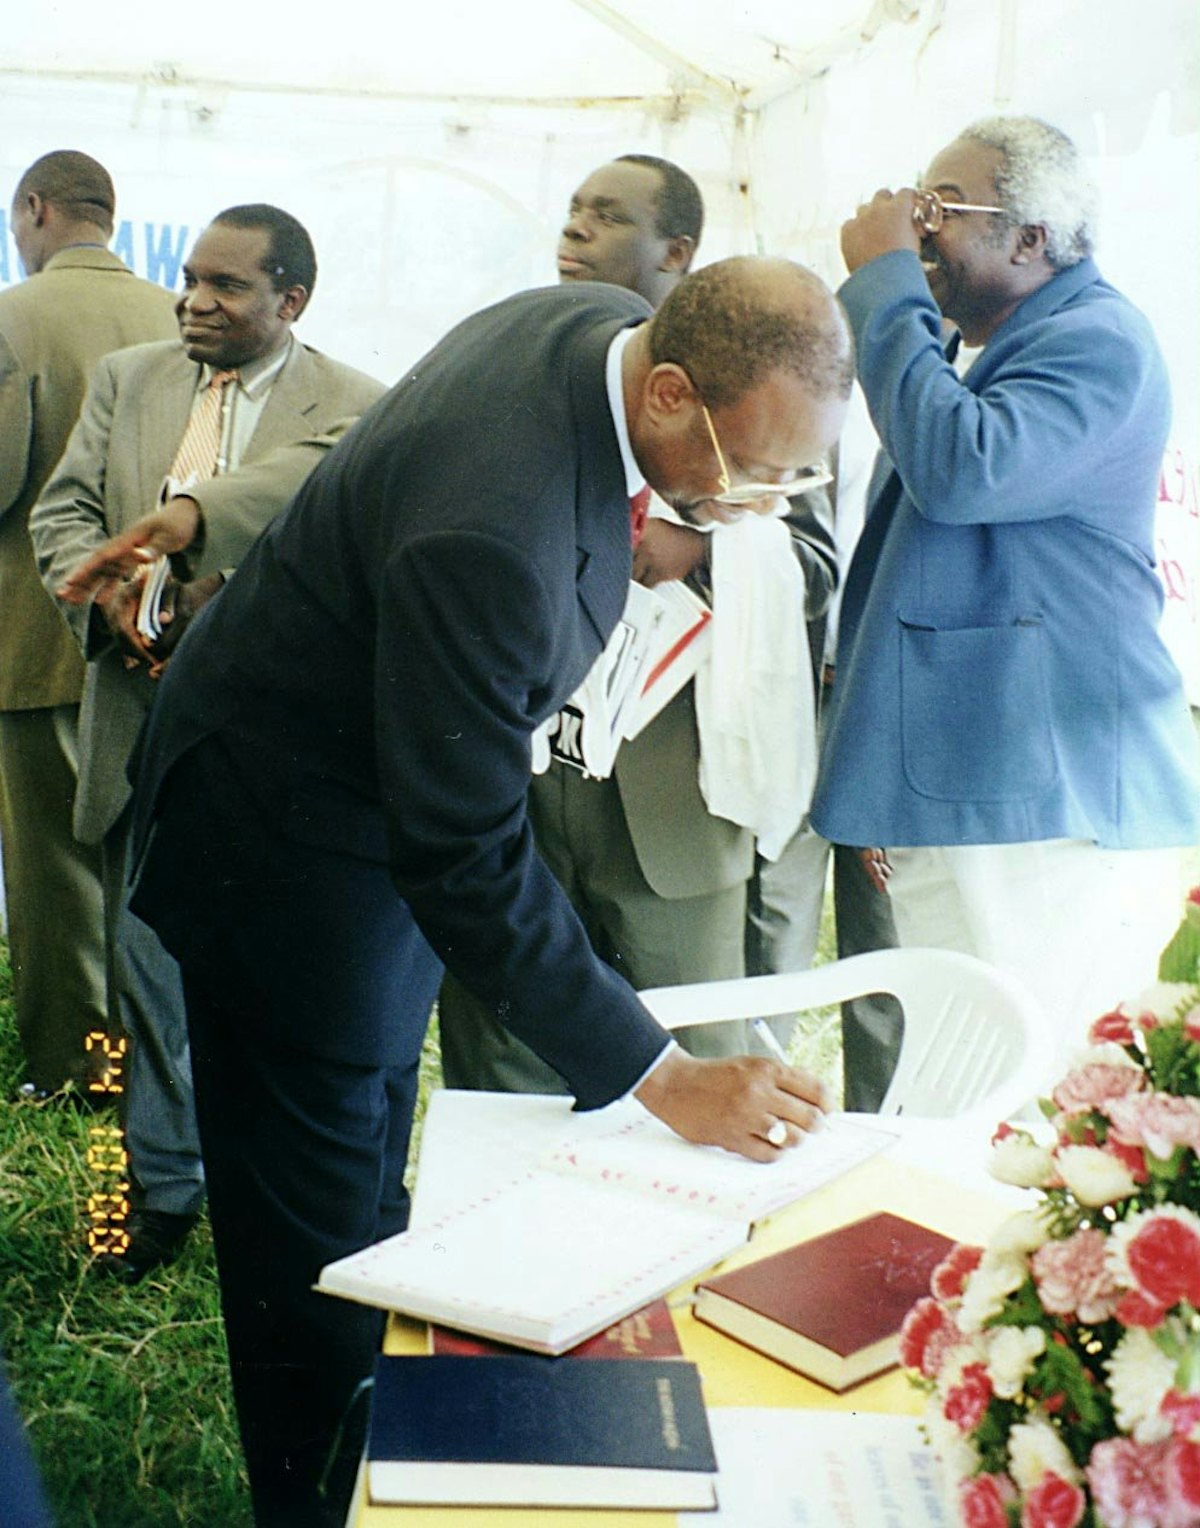 Mr. Dauda Toure, United Nations Resident Coordinator, signs the Guest Book in the Baha'i exhibit at Uganda's national United Nations Day commemoration.